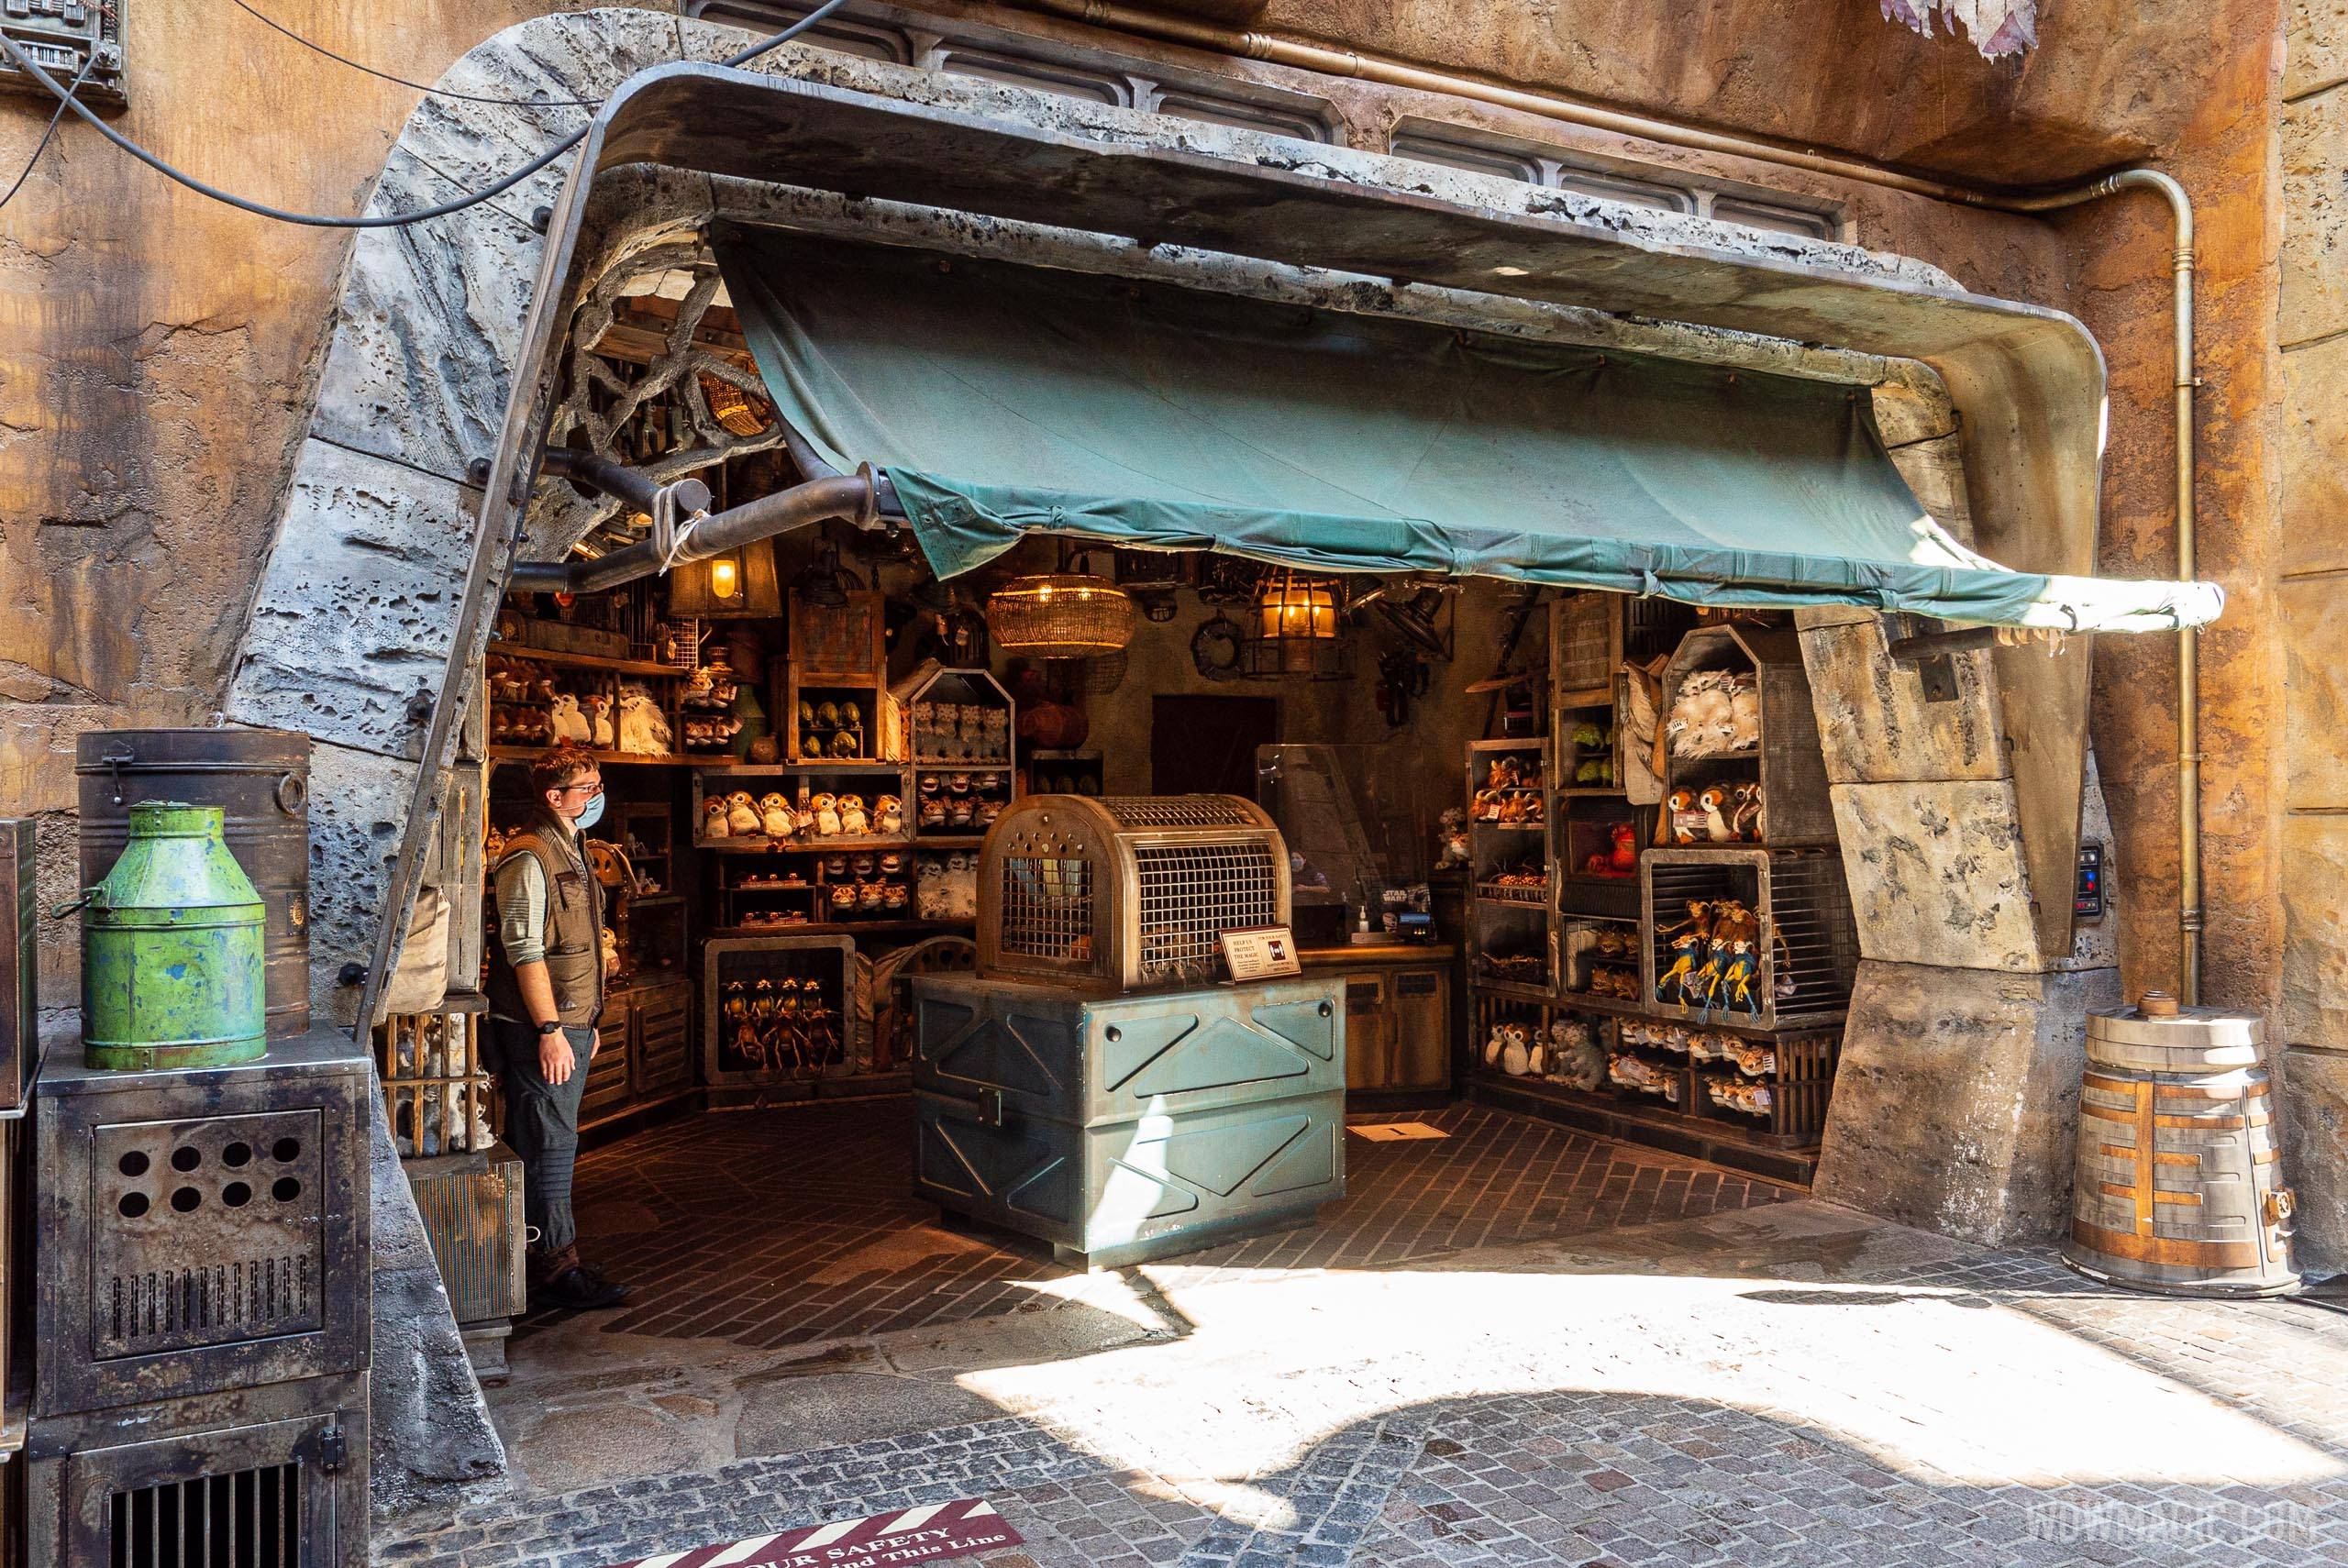 New details on the table service restaurant that was to be part of the Star Wars Galaxy's Edge experience